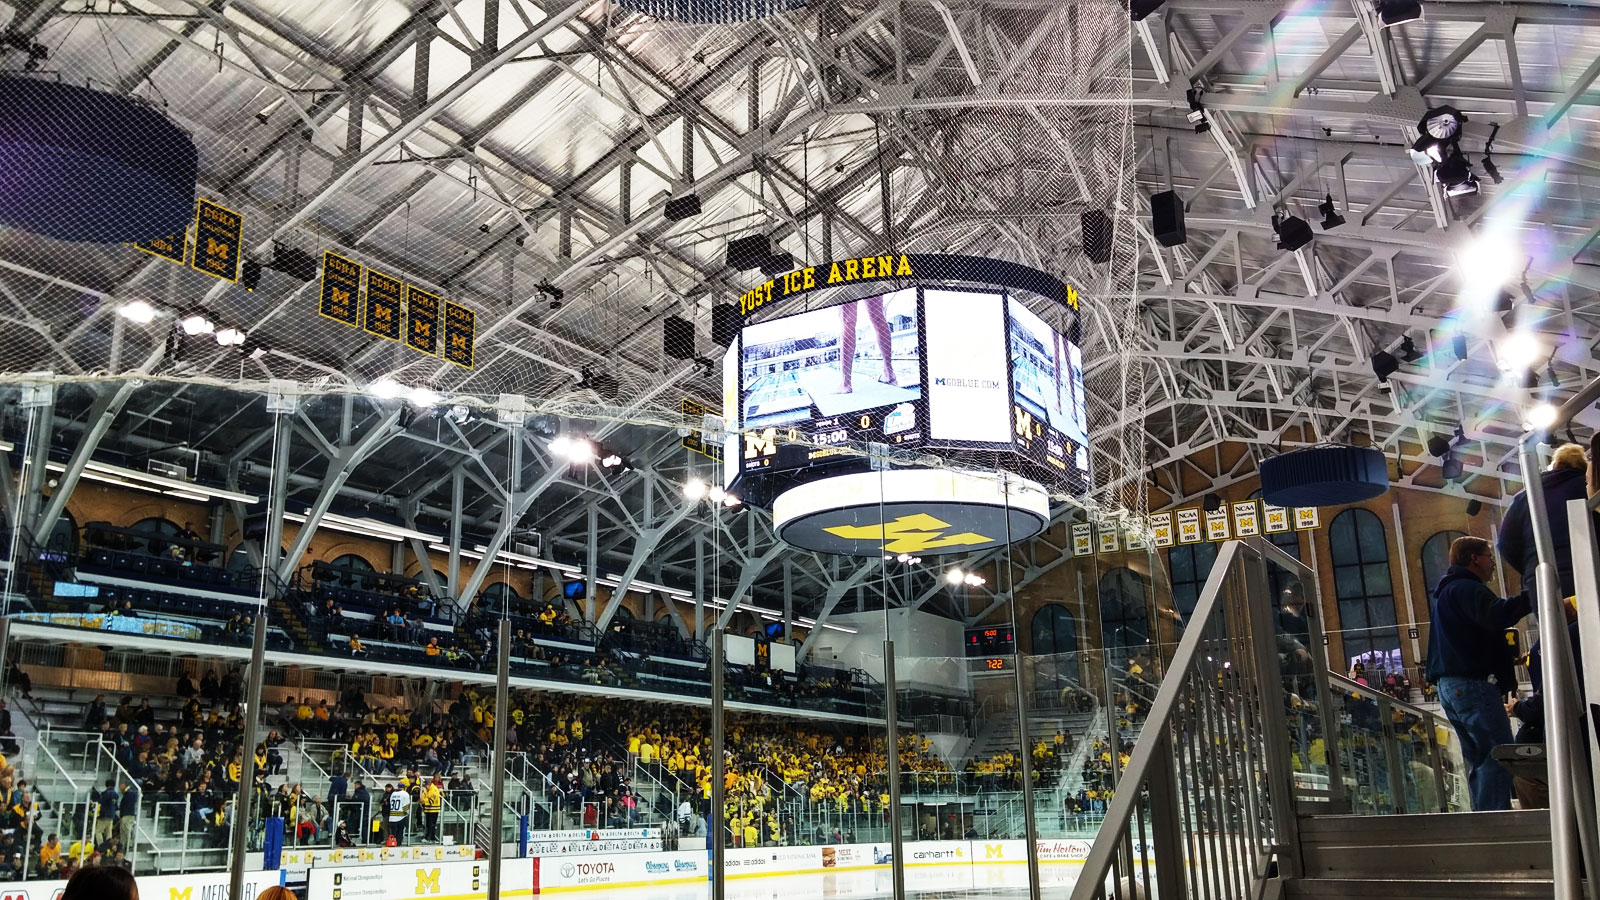 Yost Ice Arena, home to the Michigan Wolverines and their rowdy fans.